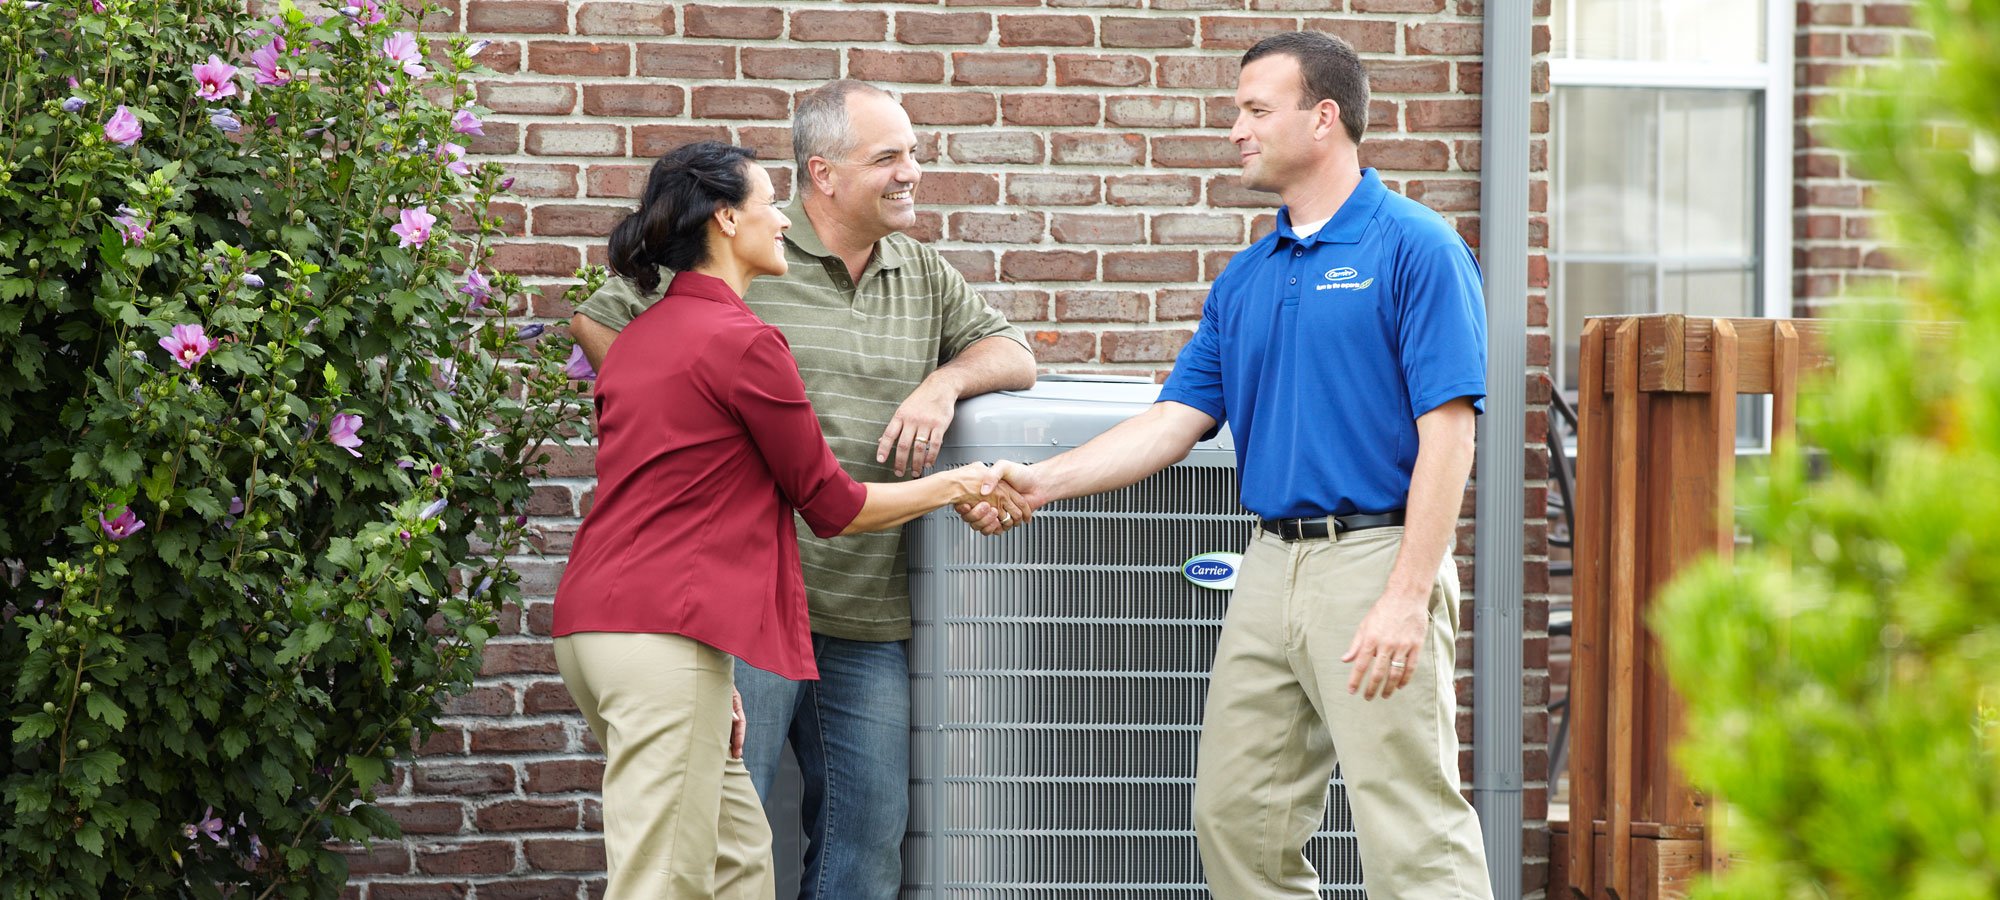 Carrier air conditioning installers